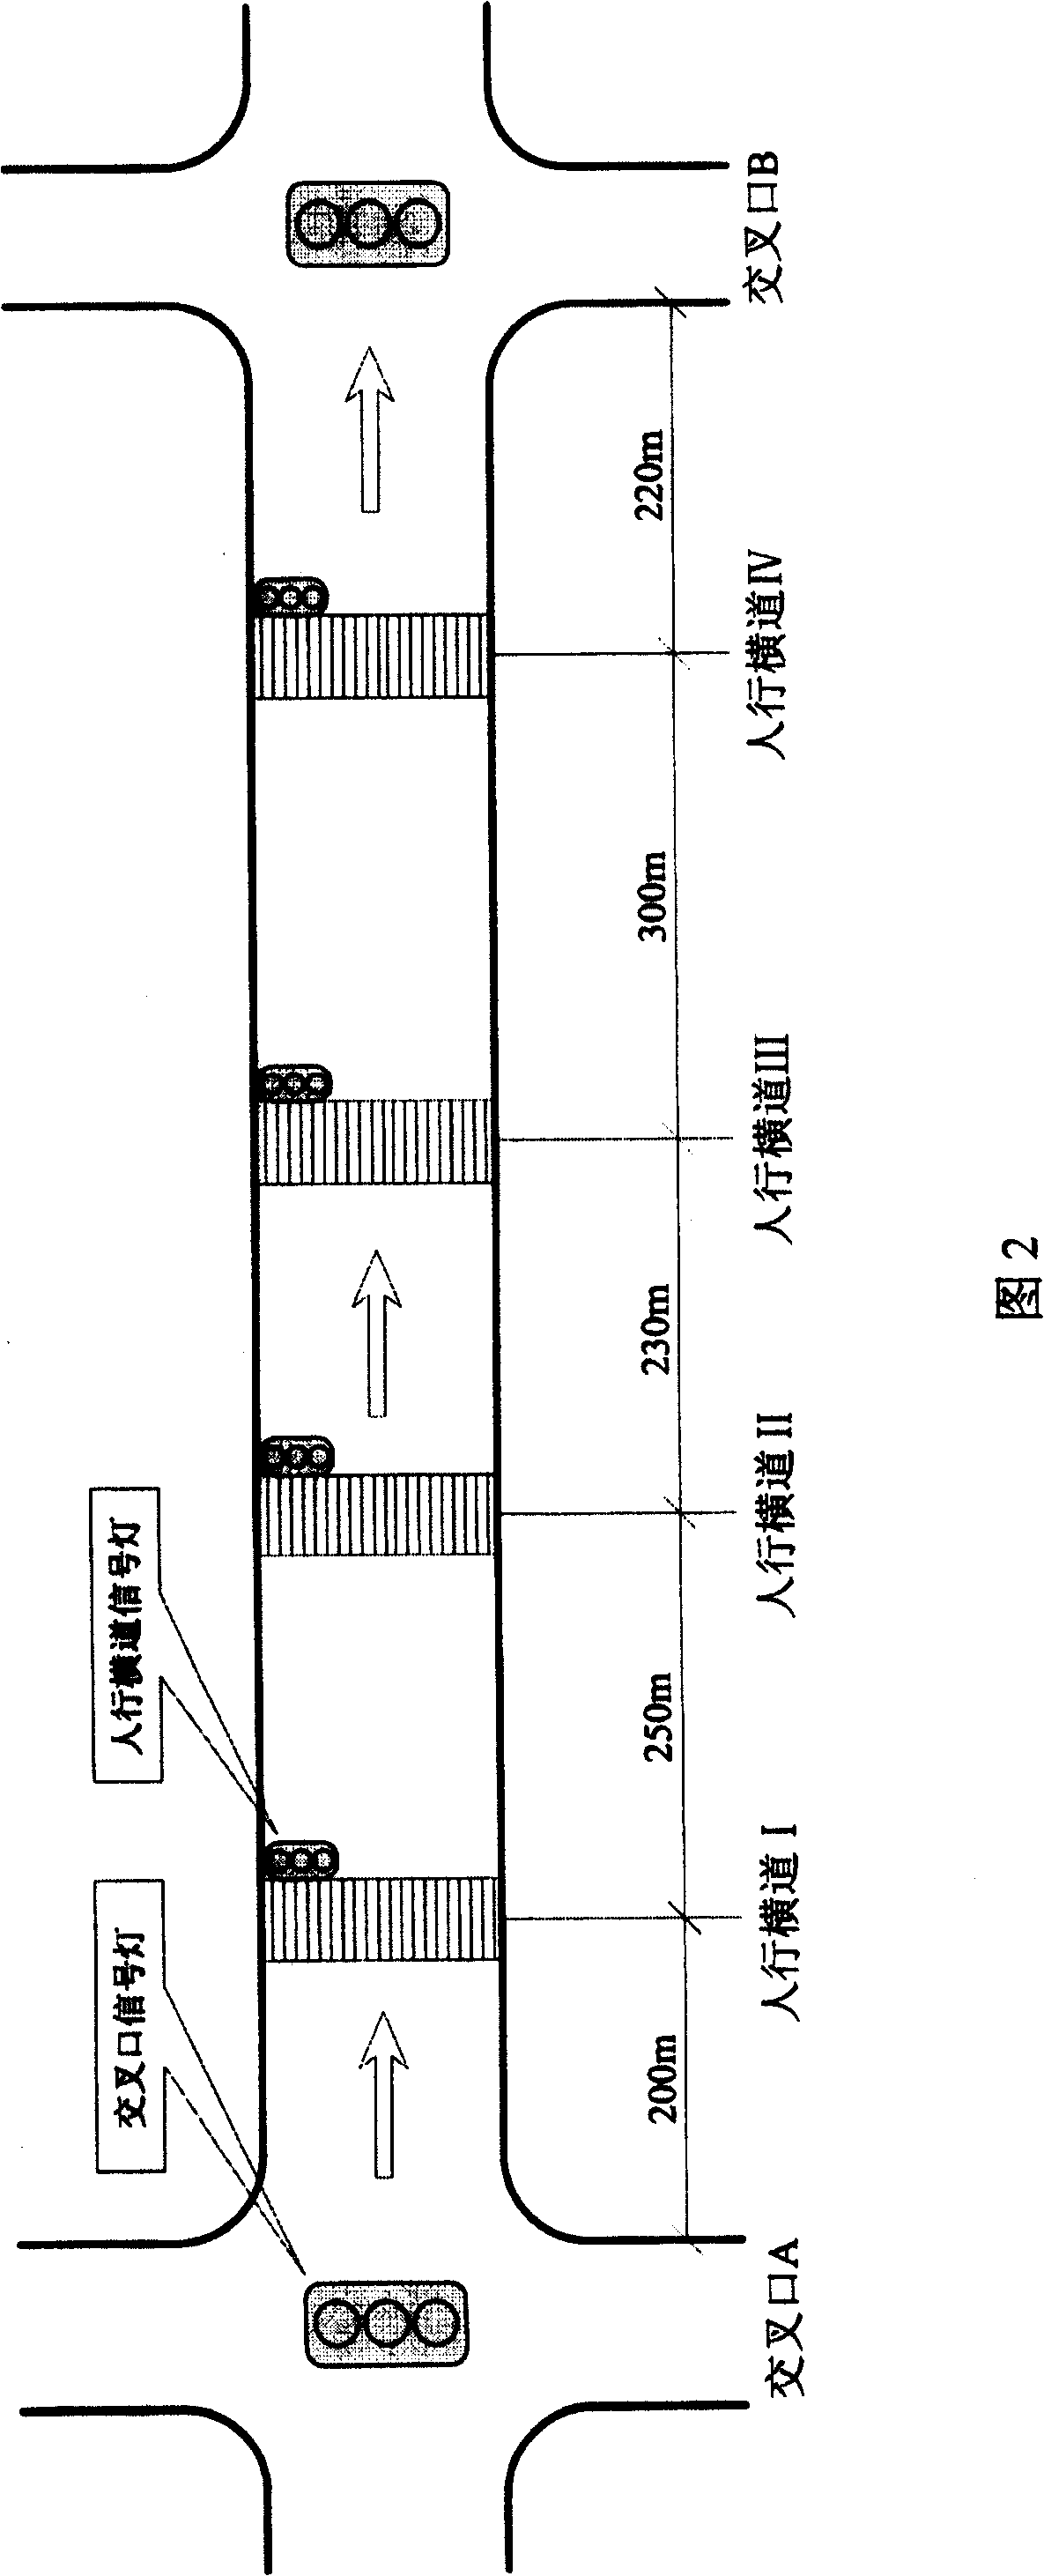 Automatic control method for green wave of pedestrian crossing street signal lamp